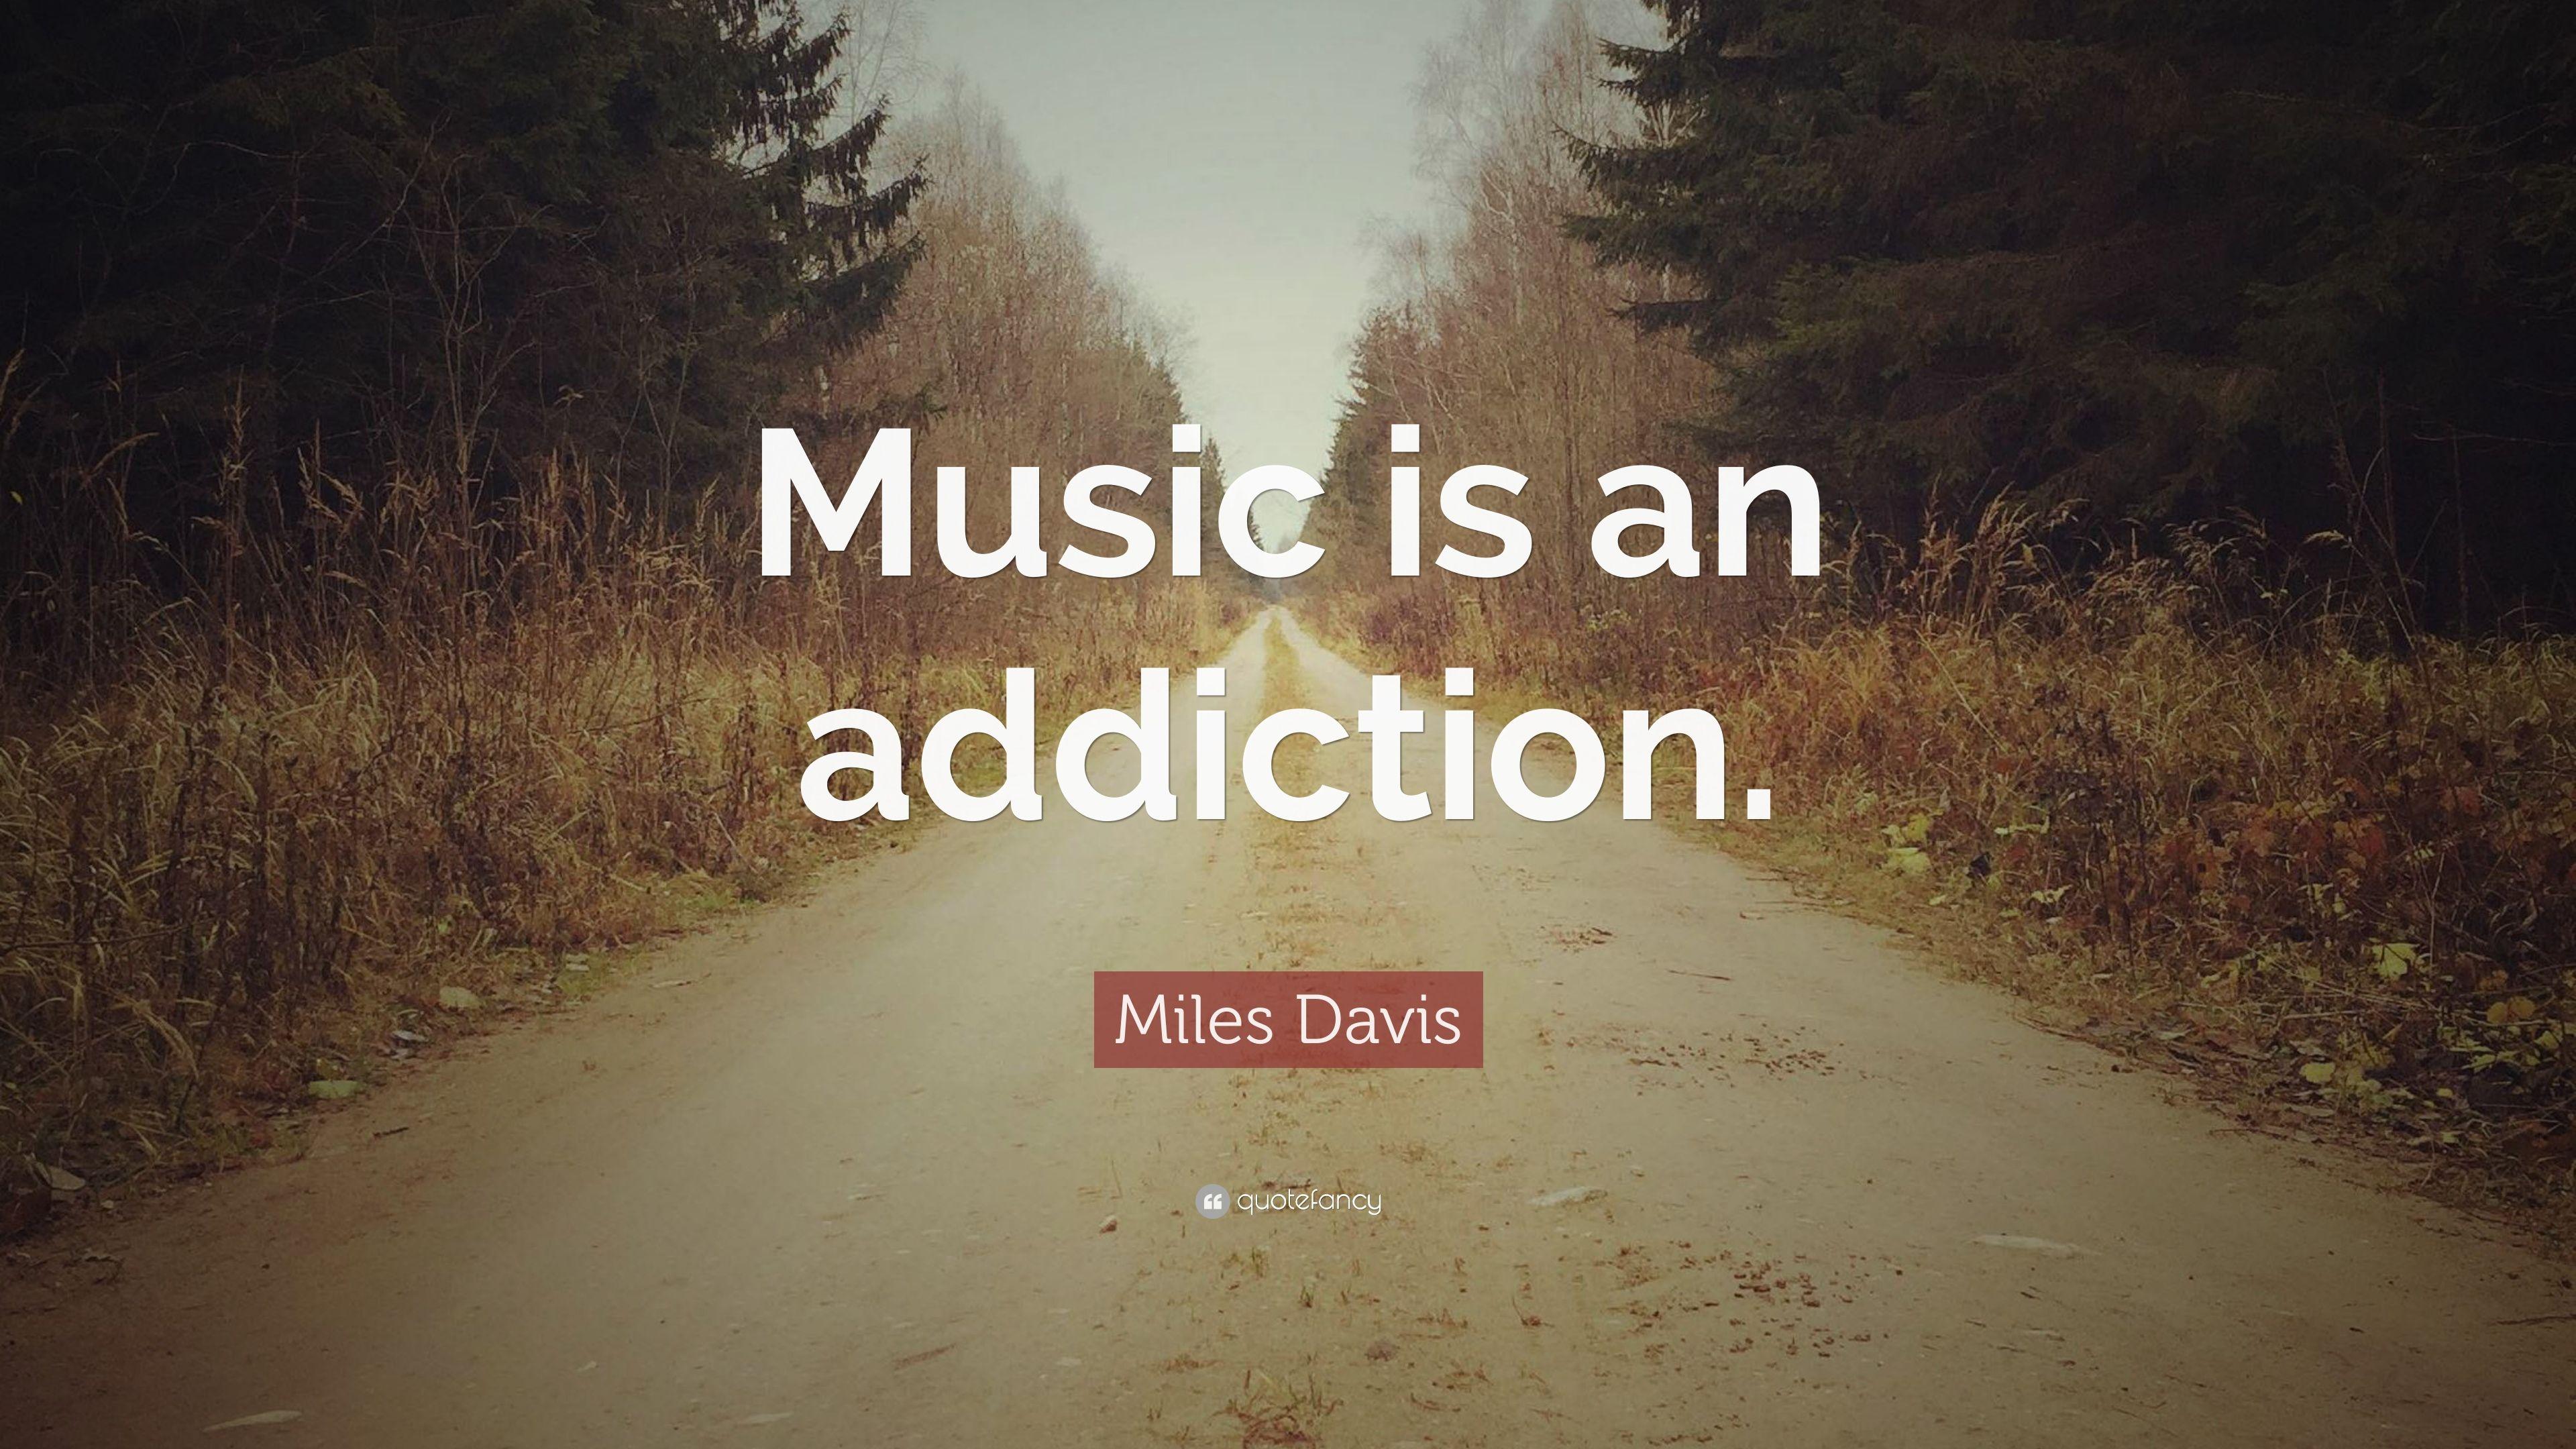 Miles Davis Quote: “Music is an addiction.” (10 wallpaper)